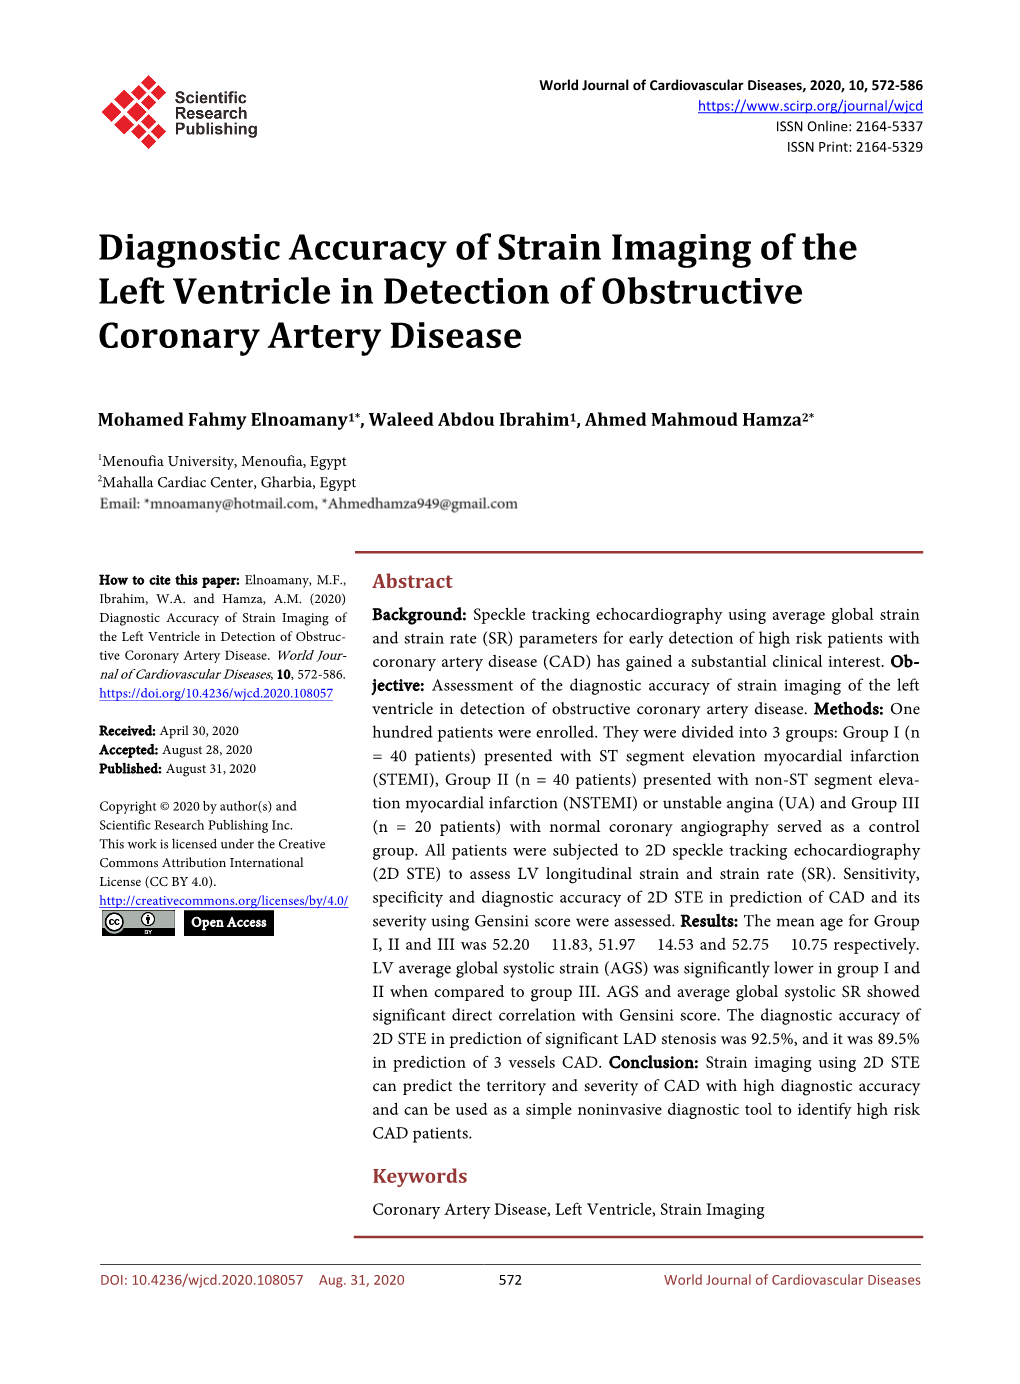 Diagnostic Accuracy of Strain Imaging of the Left Ventricle in Detection of Obstructive Coronary Artery Disease